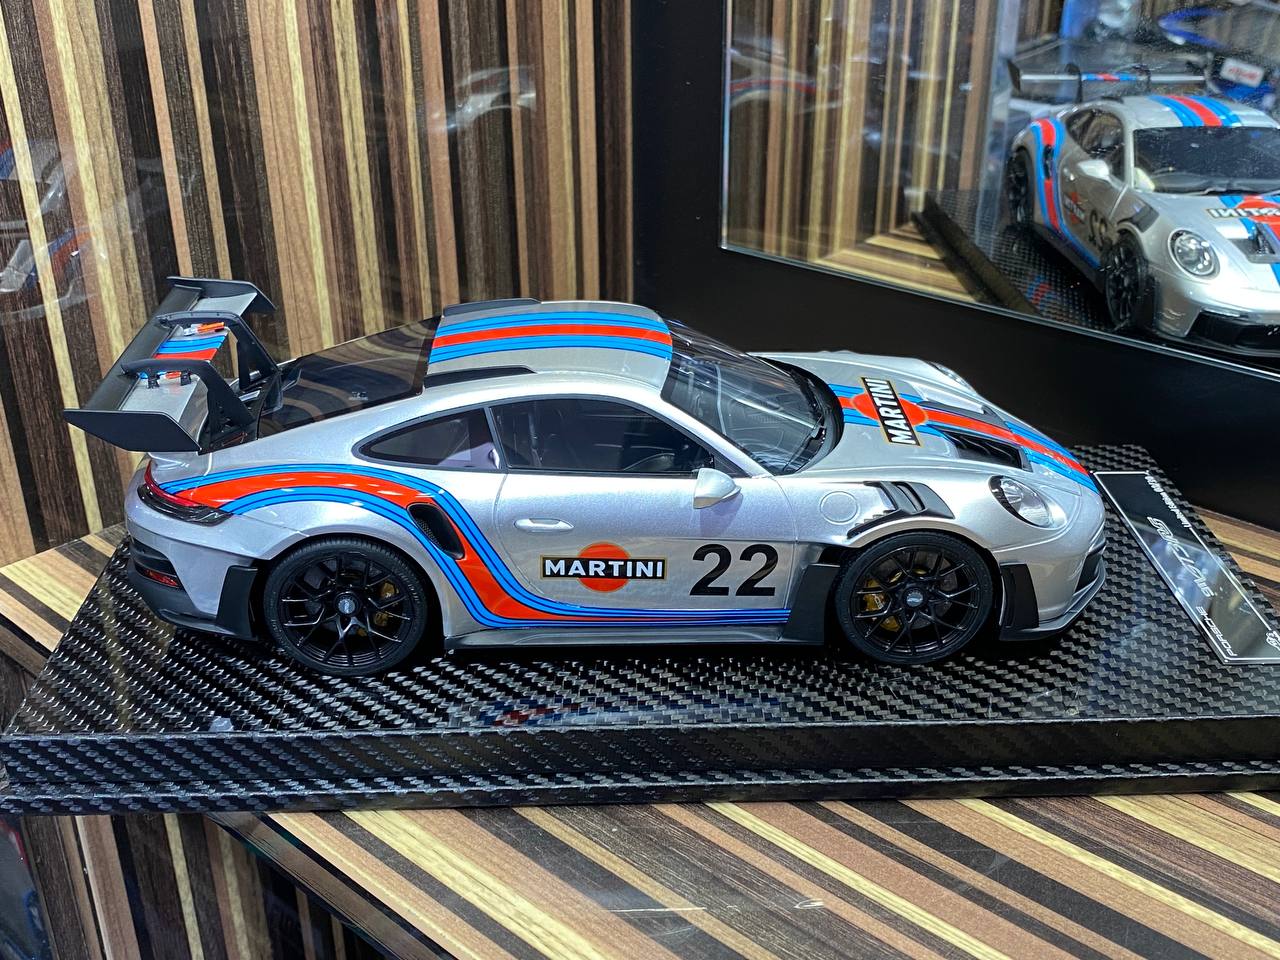 1/18 VIP Models Resin Model - Porsche 911 GT3 RS with Martini Decals, Limited Edition|Sold in Dturman.com Dubai UAE.